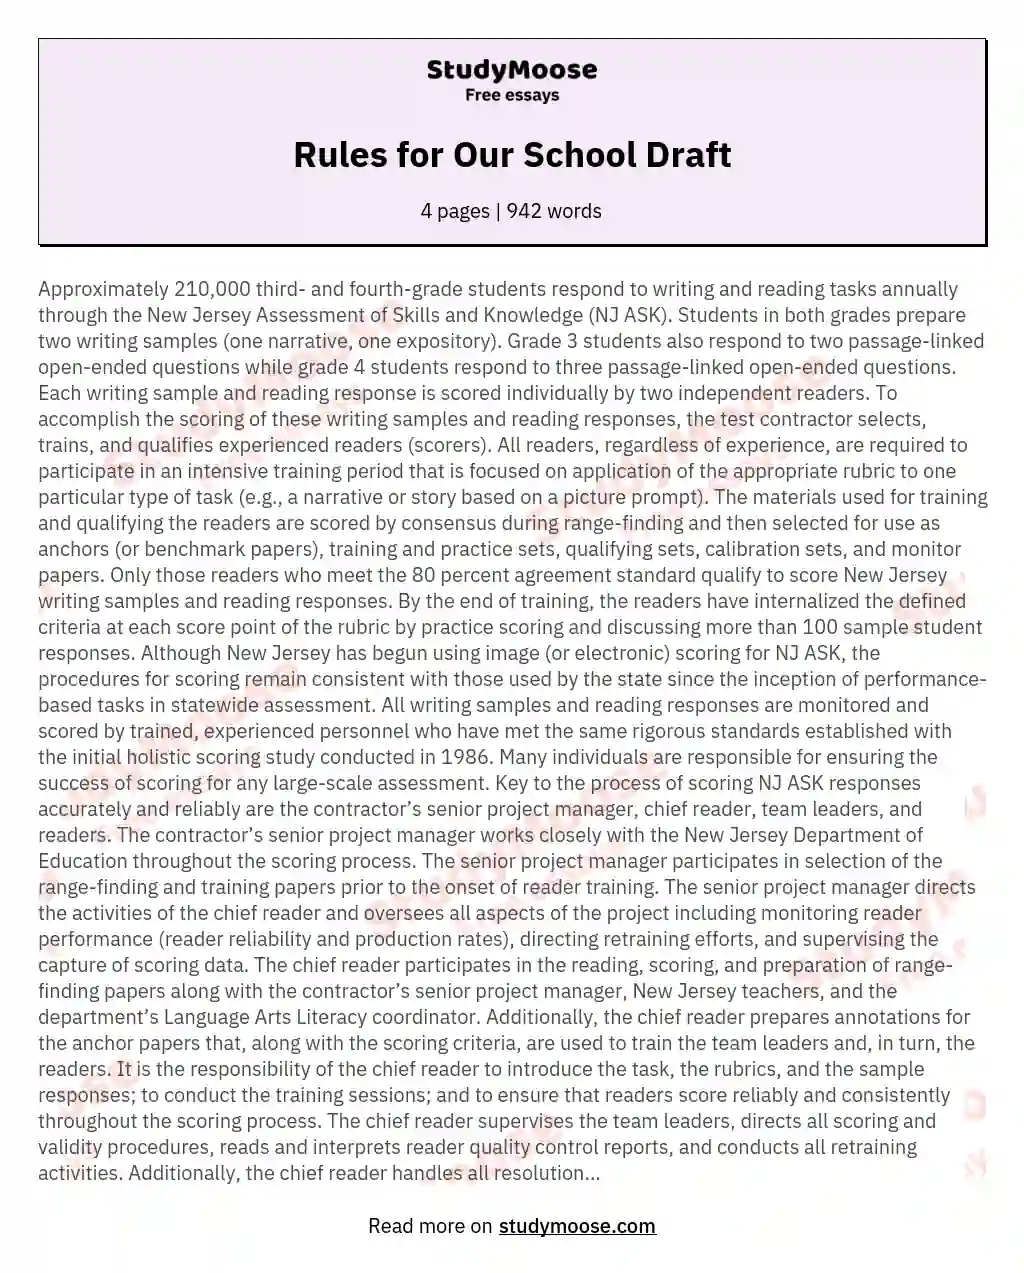 Rules for Our School Draft essay